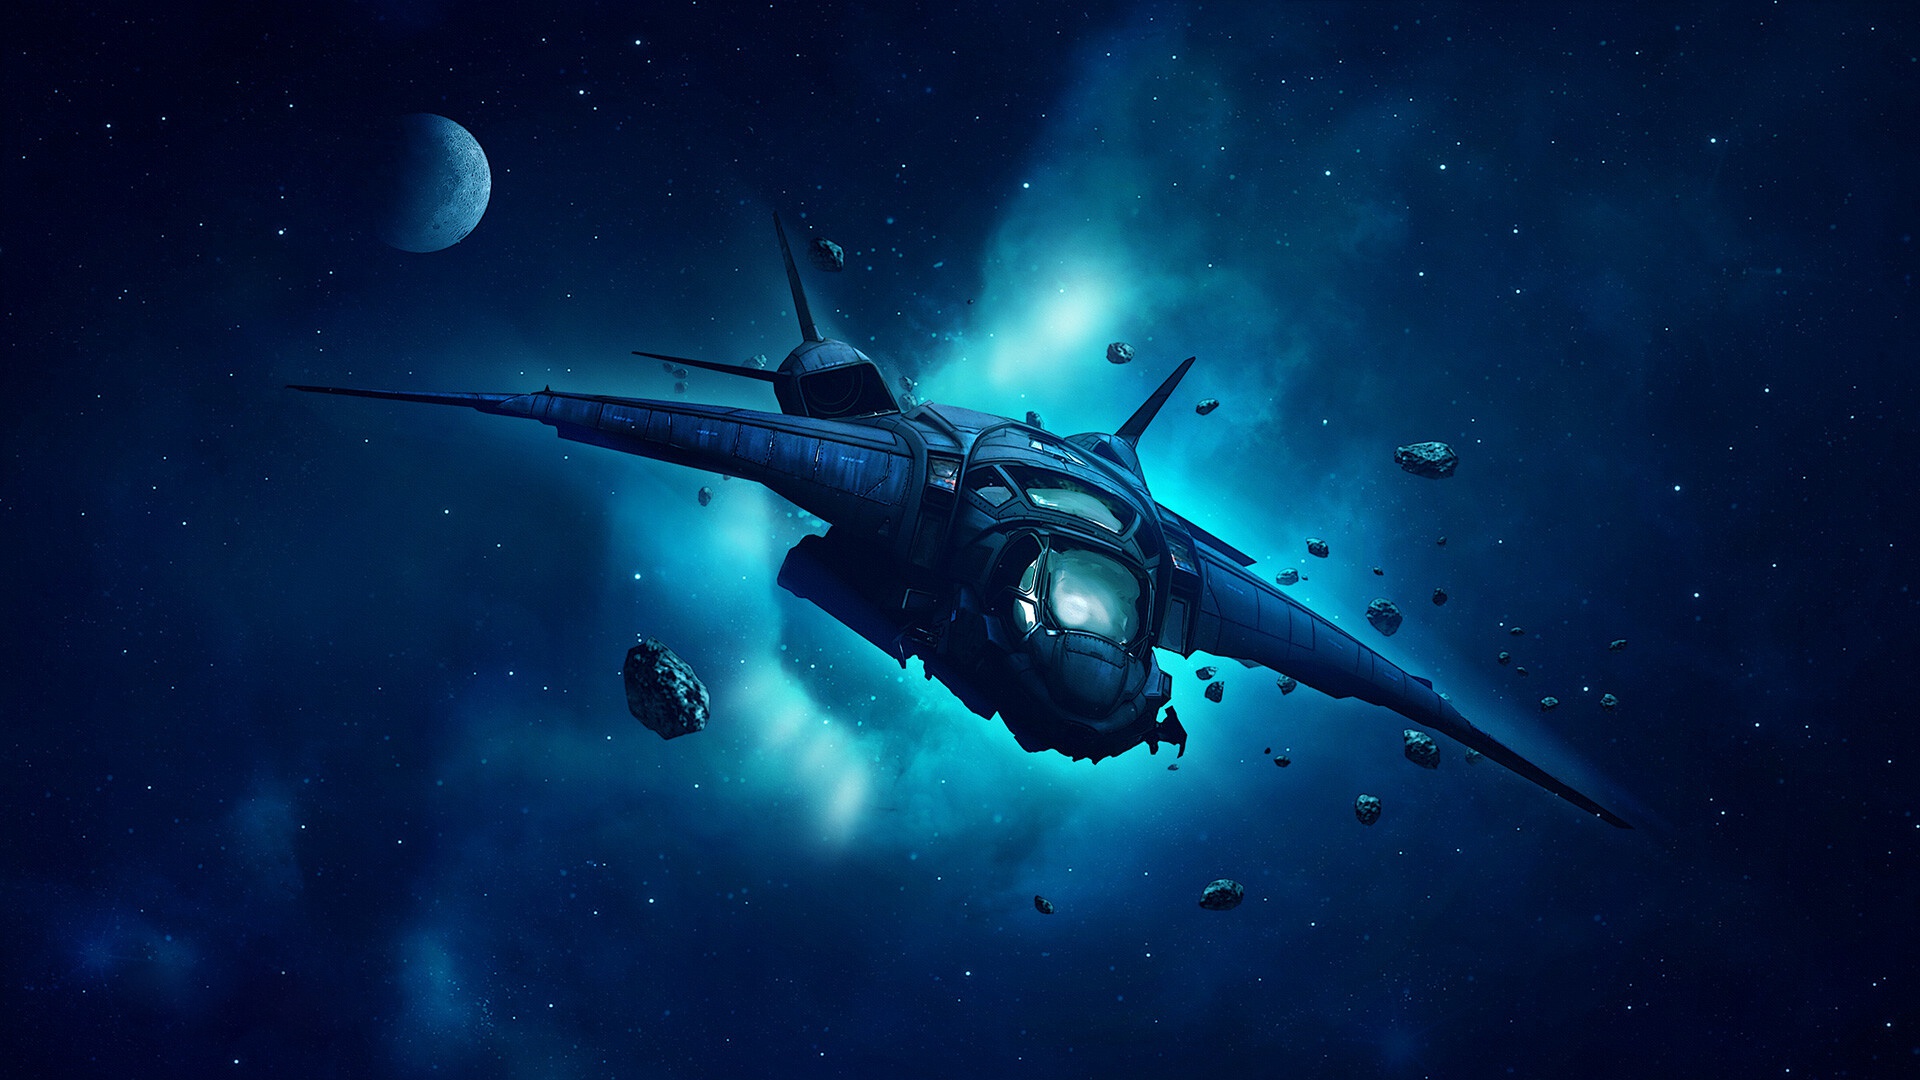 General 1920x1080 space space art vehicle science fiction spaceship blue cyan Marvel Cinematic Universe stars planet asteroid